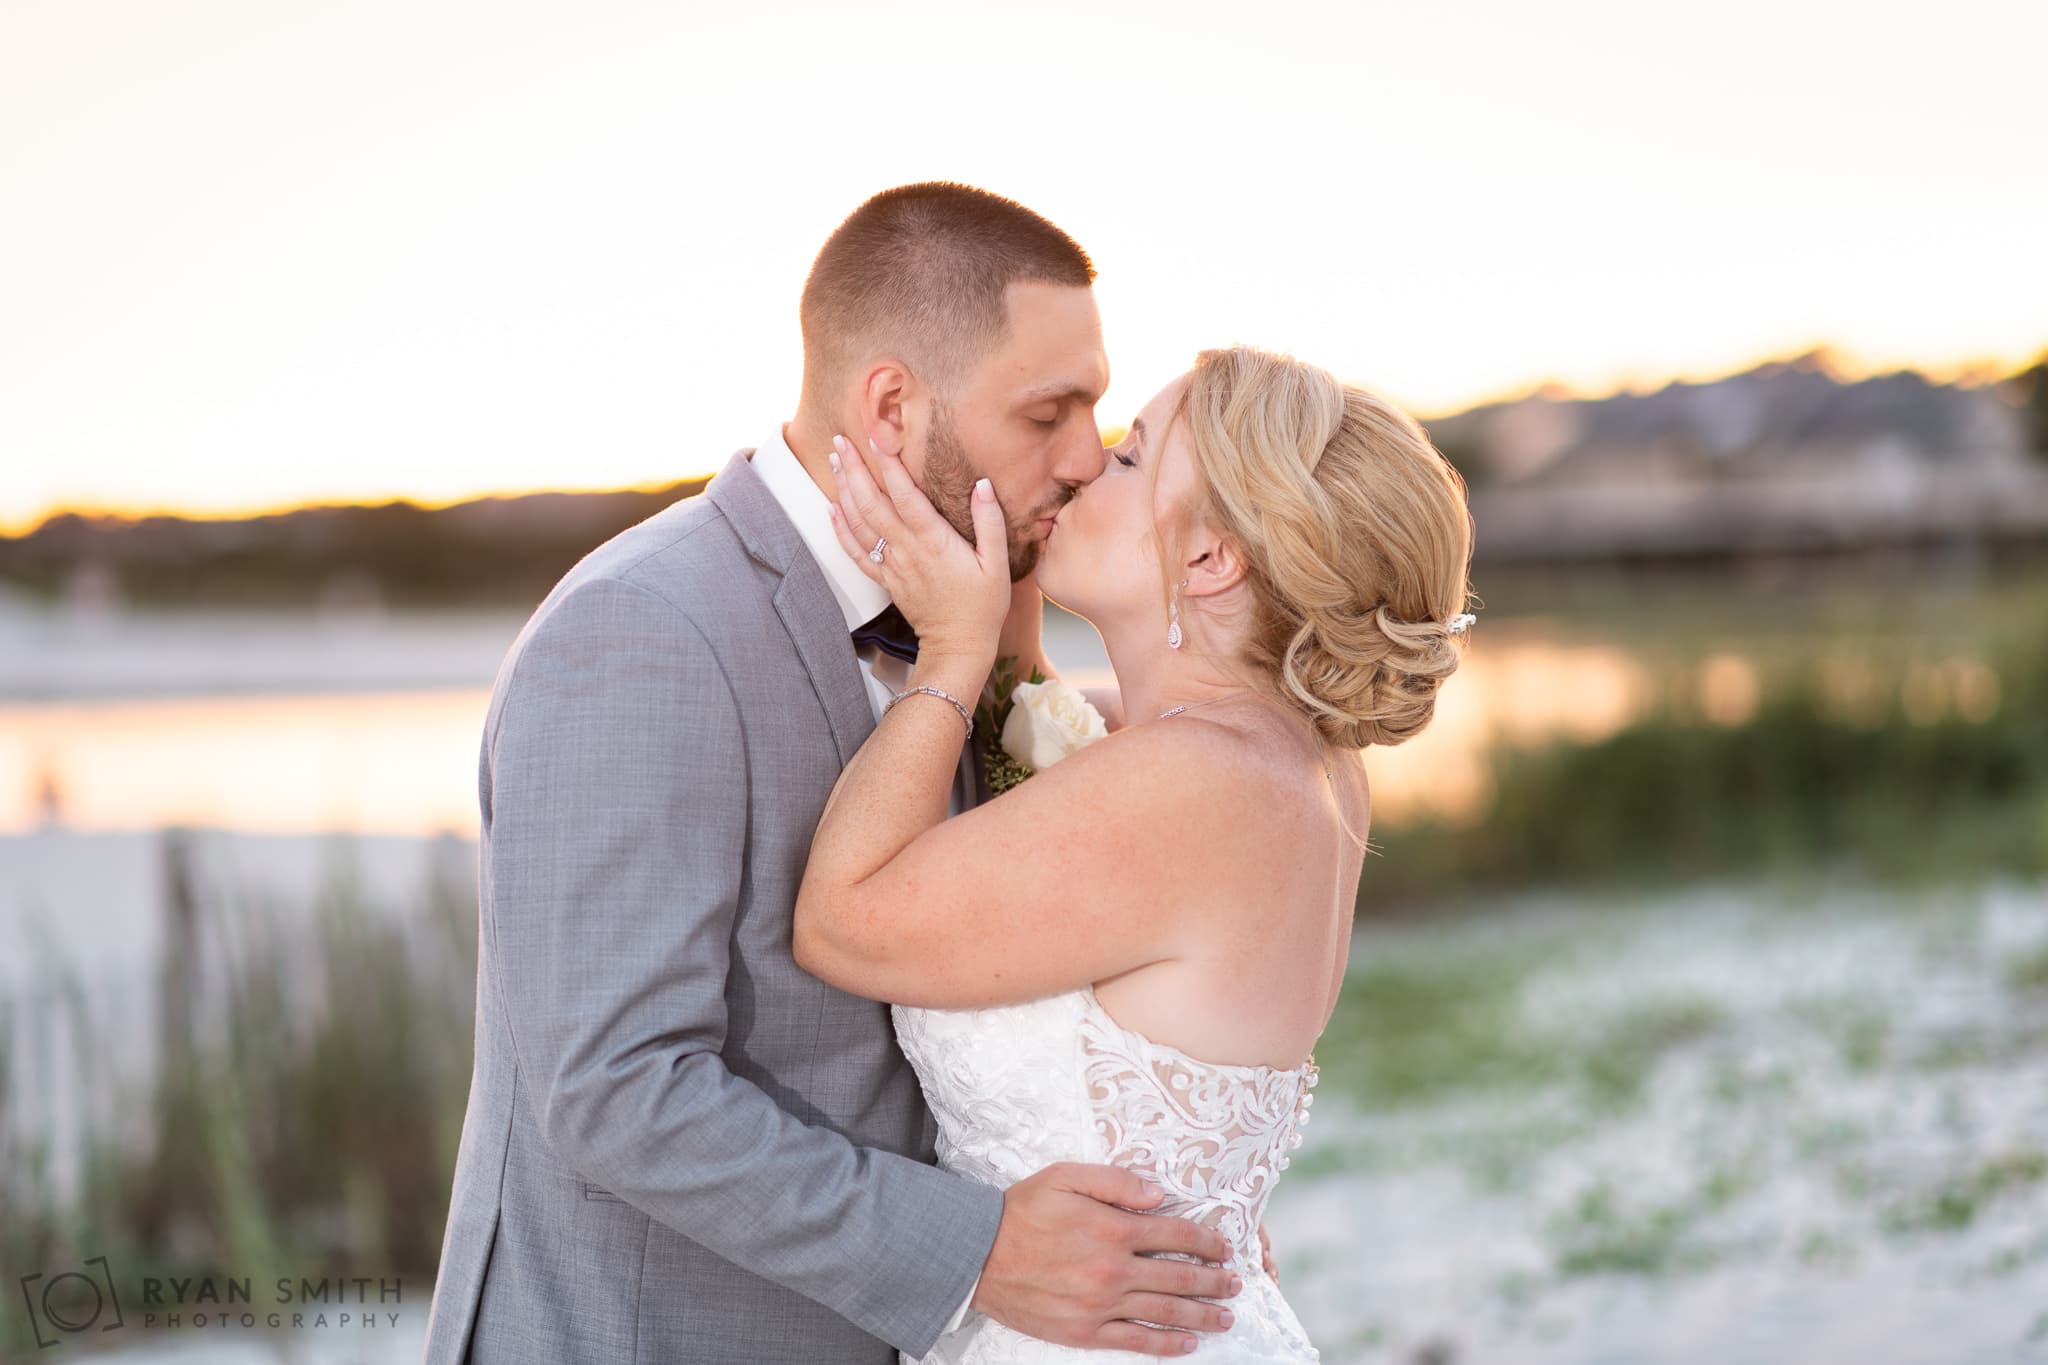 Portraits of bride and groom backlit by the sunset - 21 Main Events - North Myrtle Beach